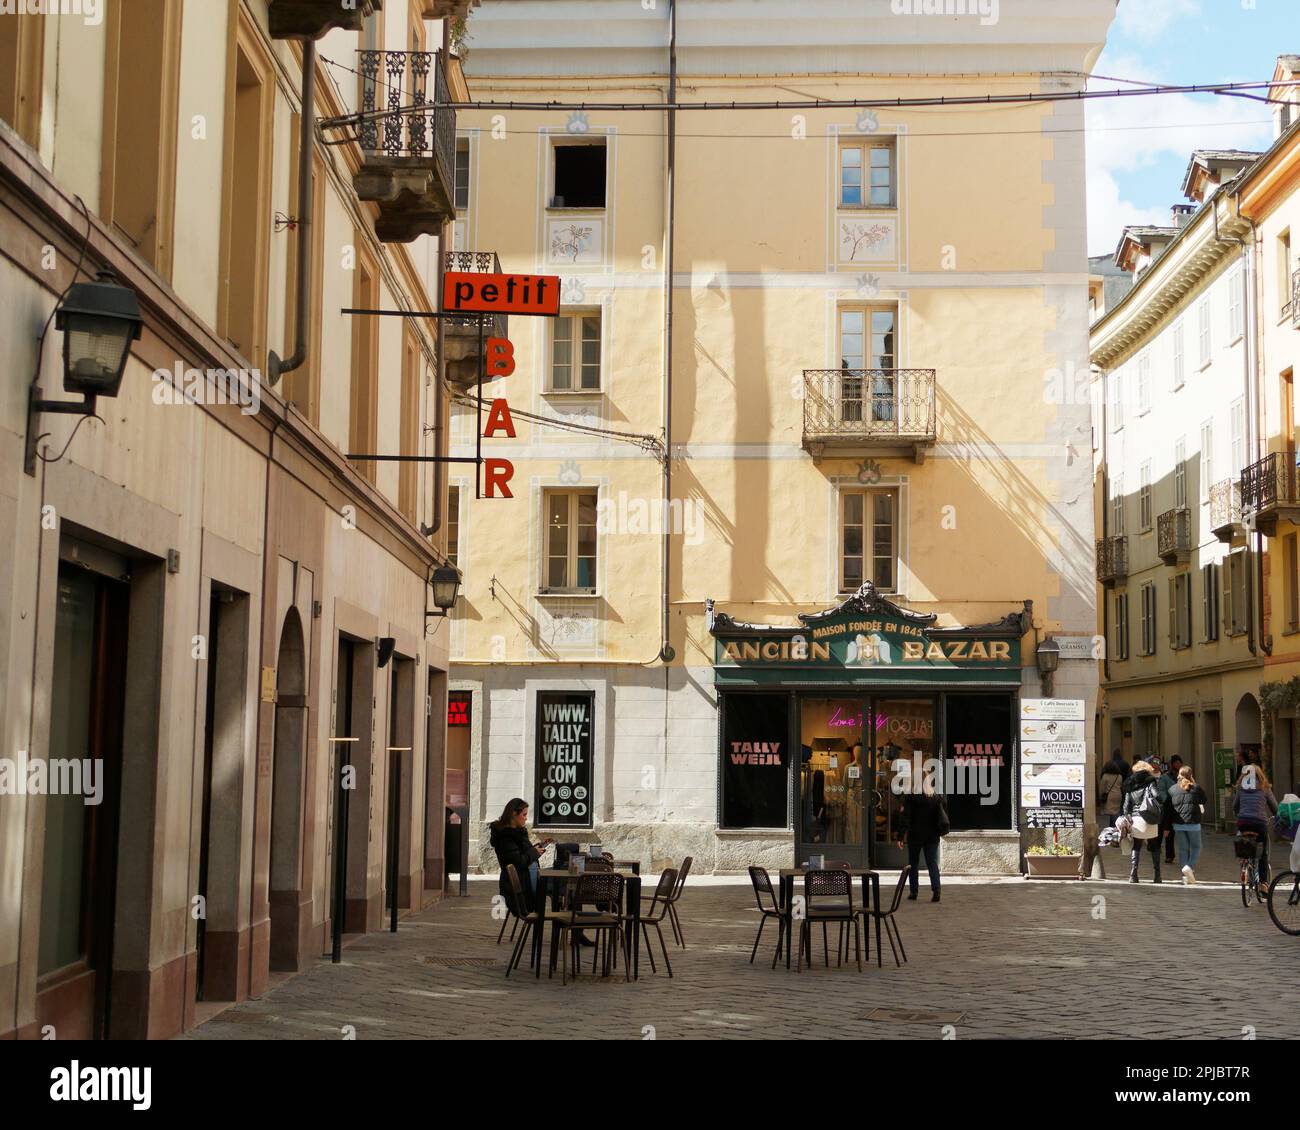 A woman sits outside a bar aka cafe in a quaint piazza with pastel colours and an orange bar sign, city of Aosta, Aosta Valley, Italy Stock Photo